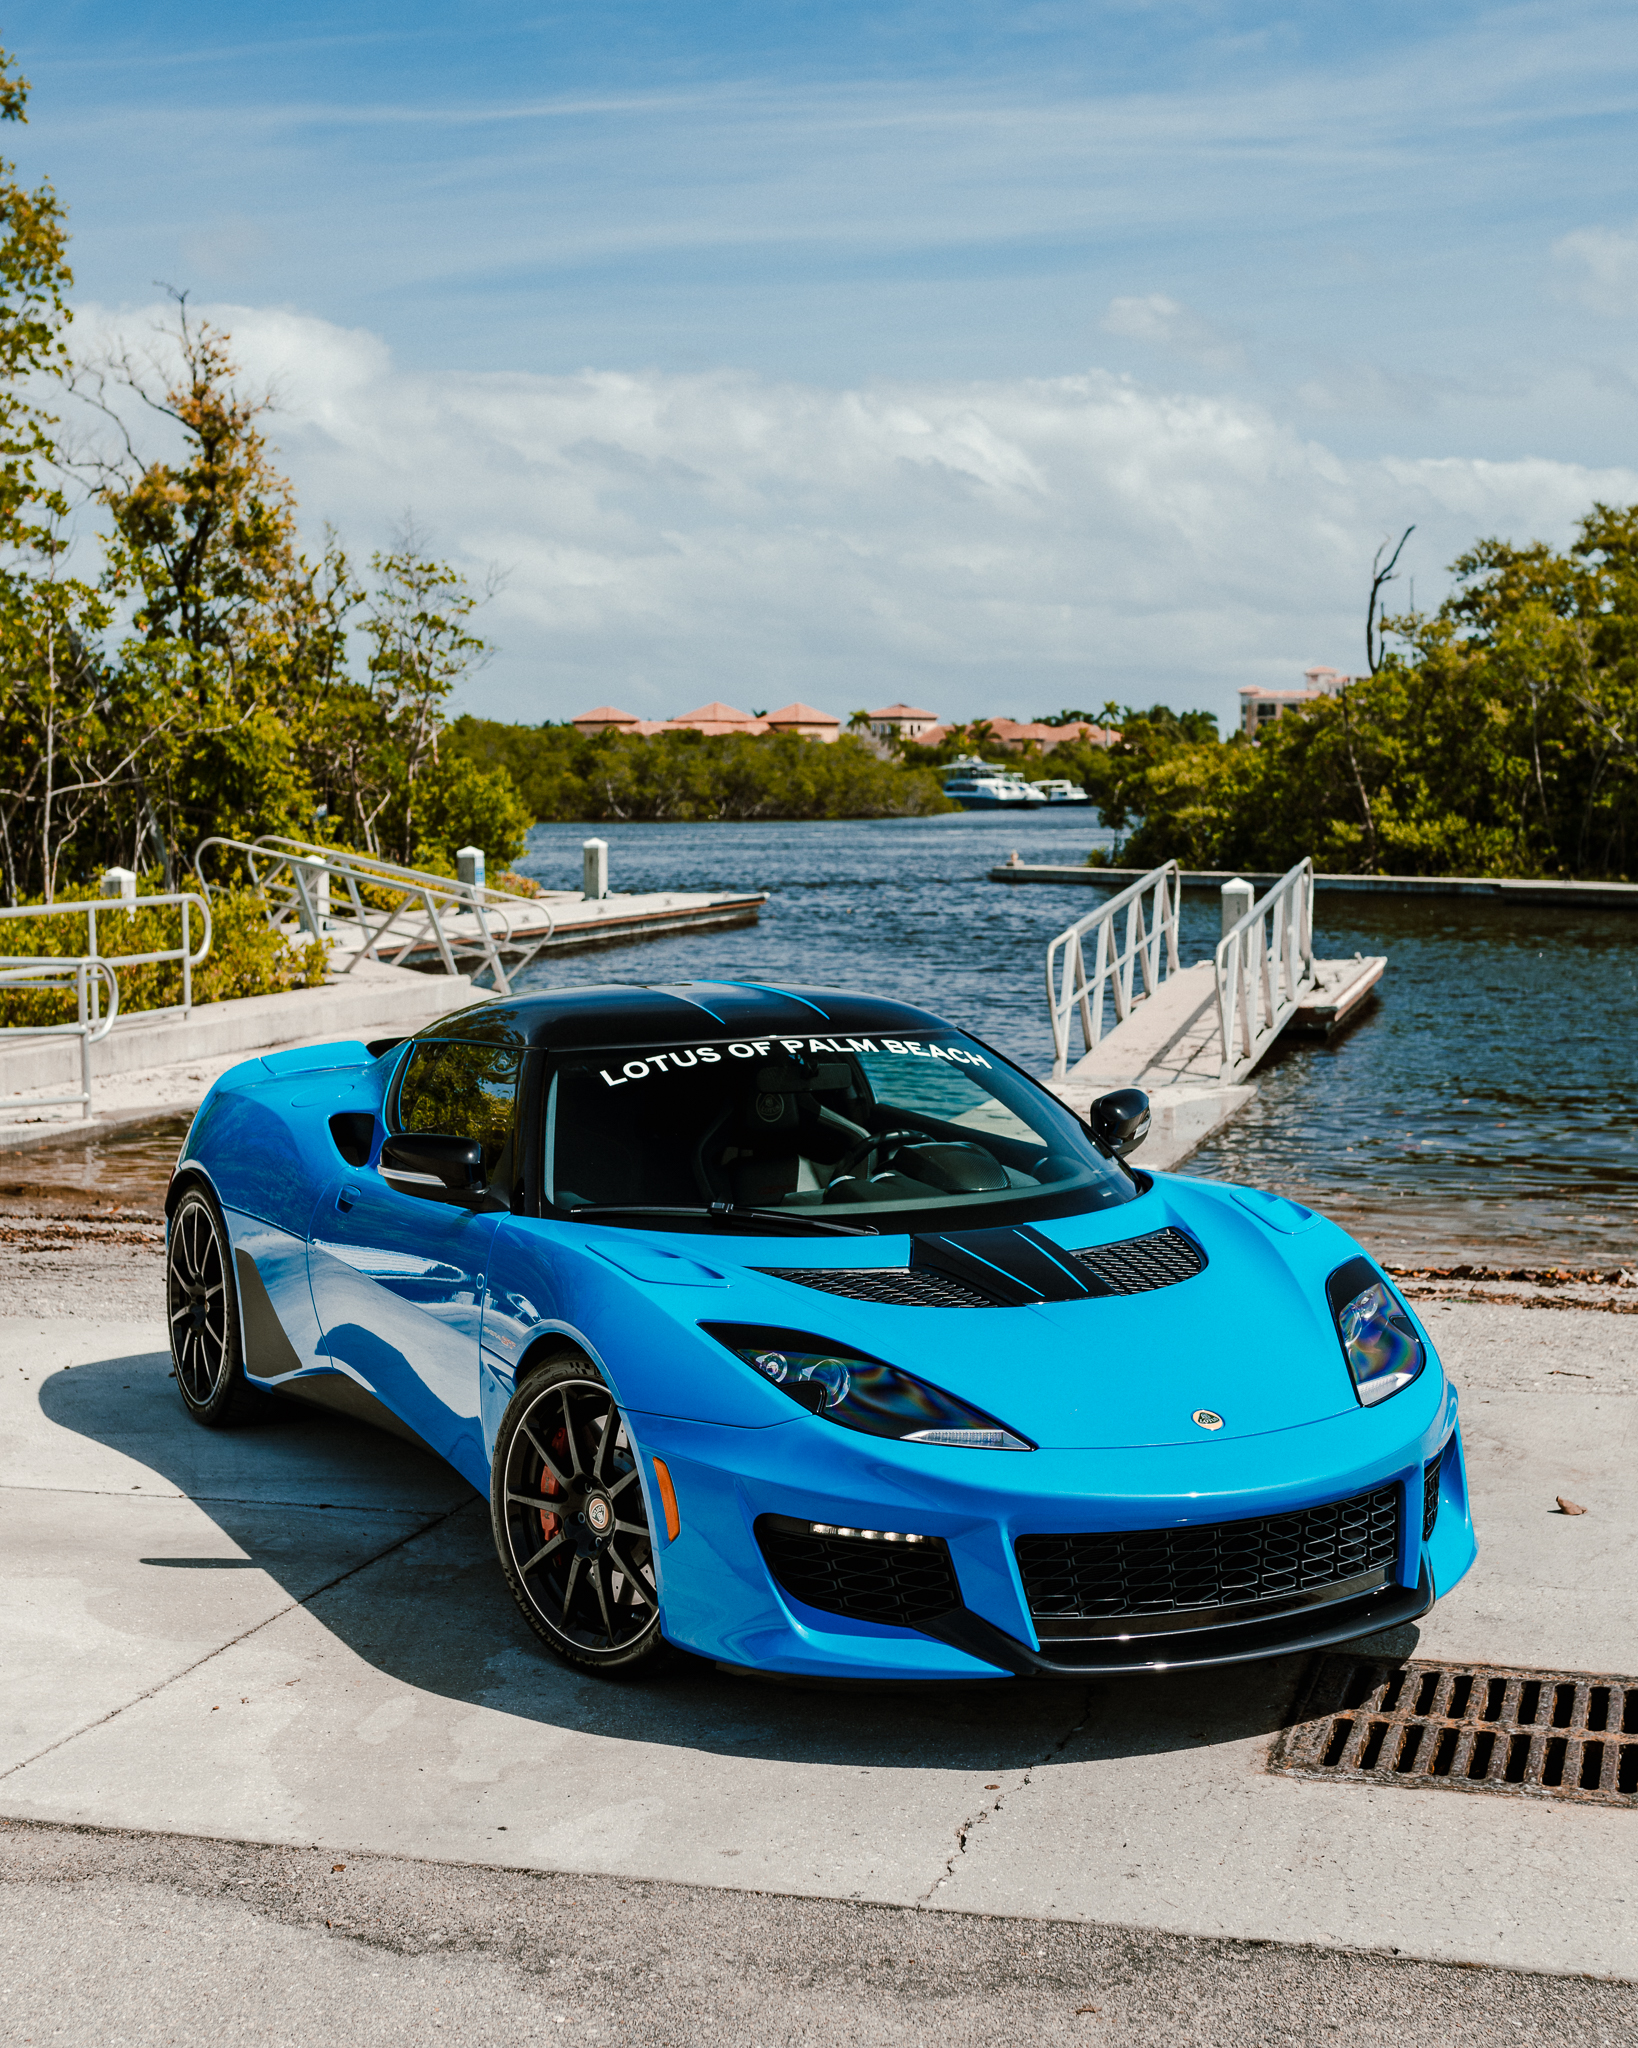 Lotus for sale near Port St Lucie